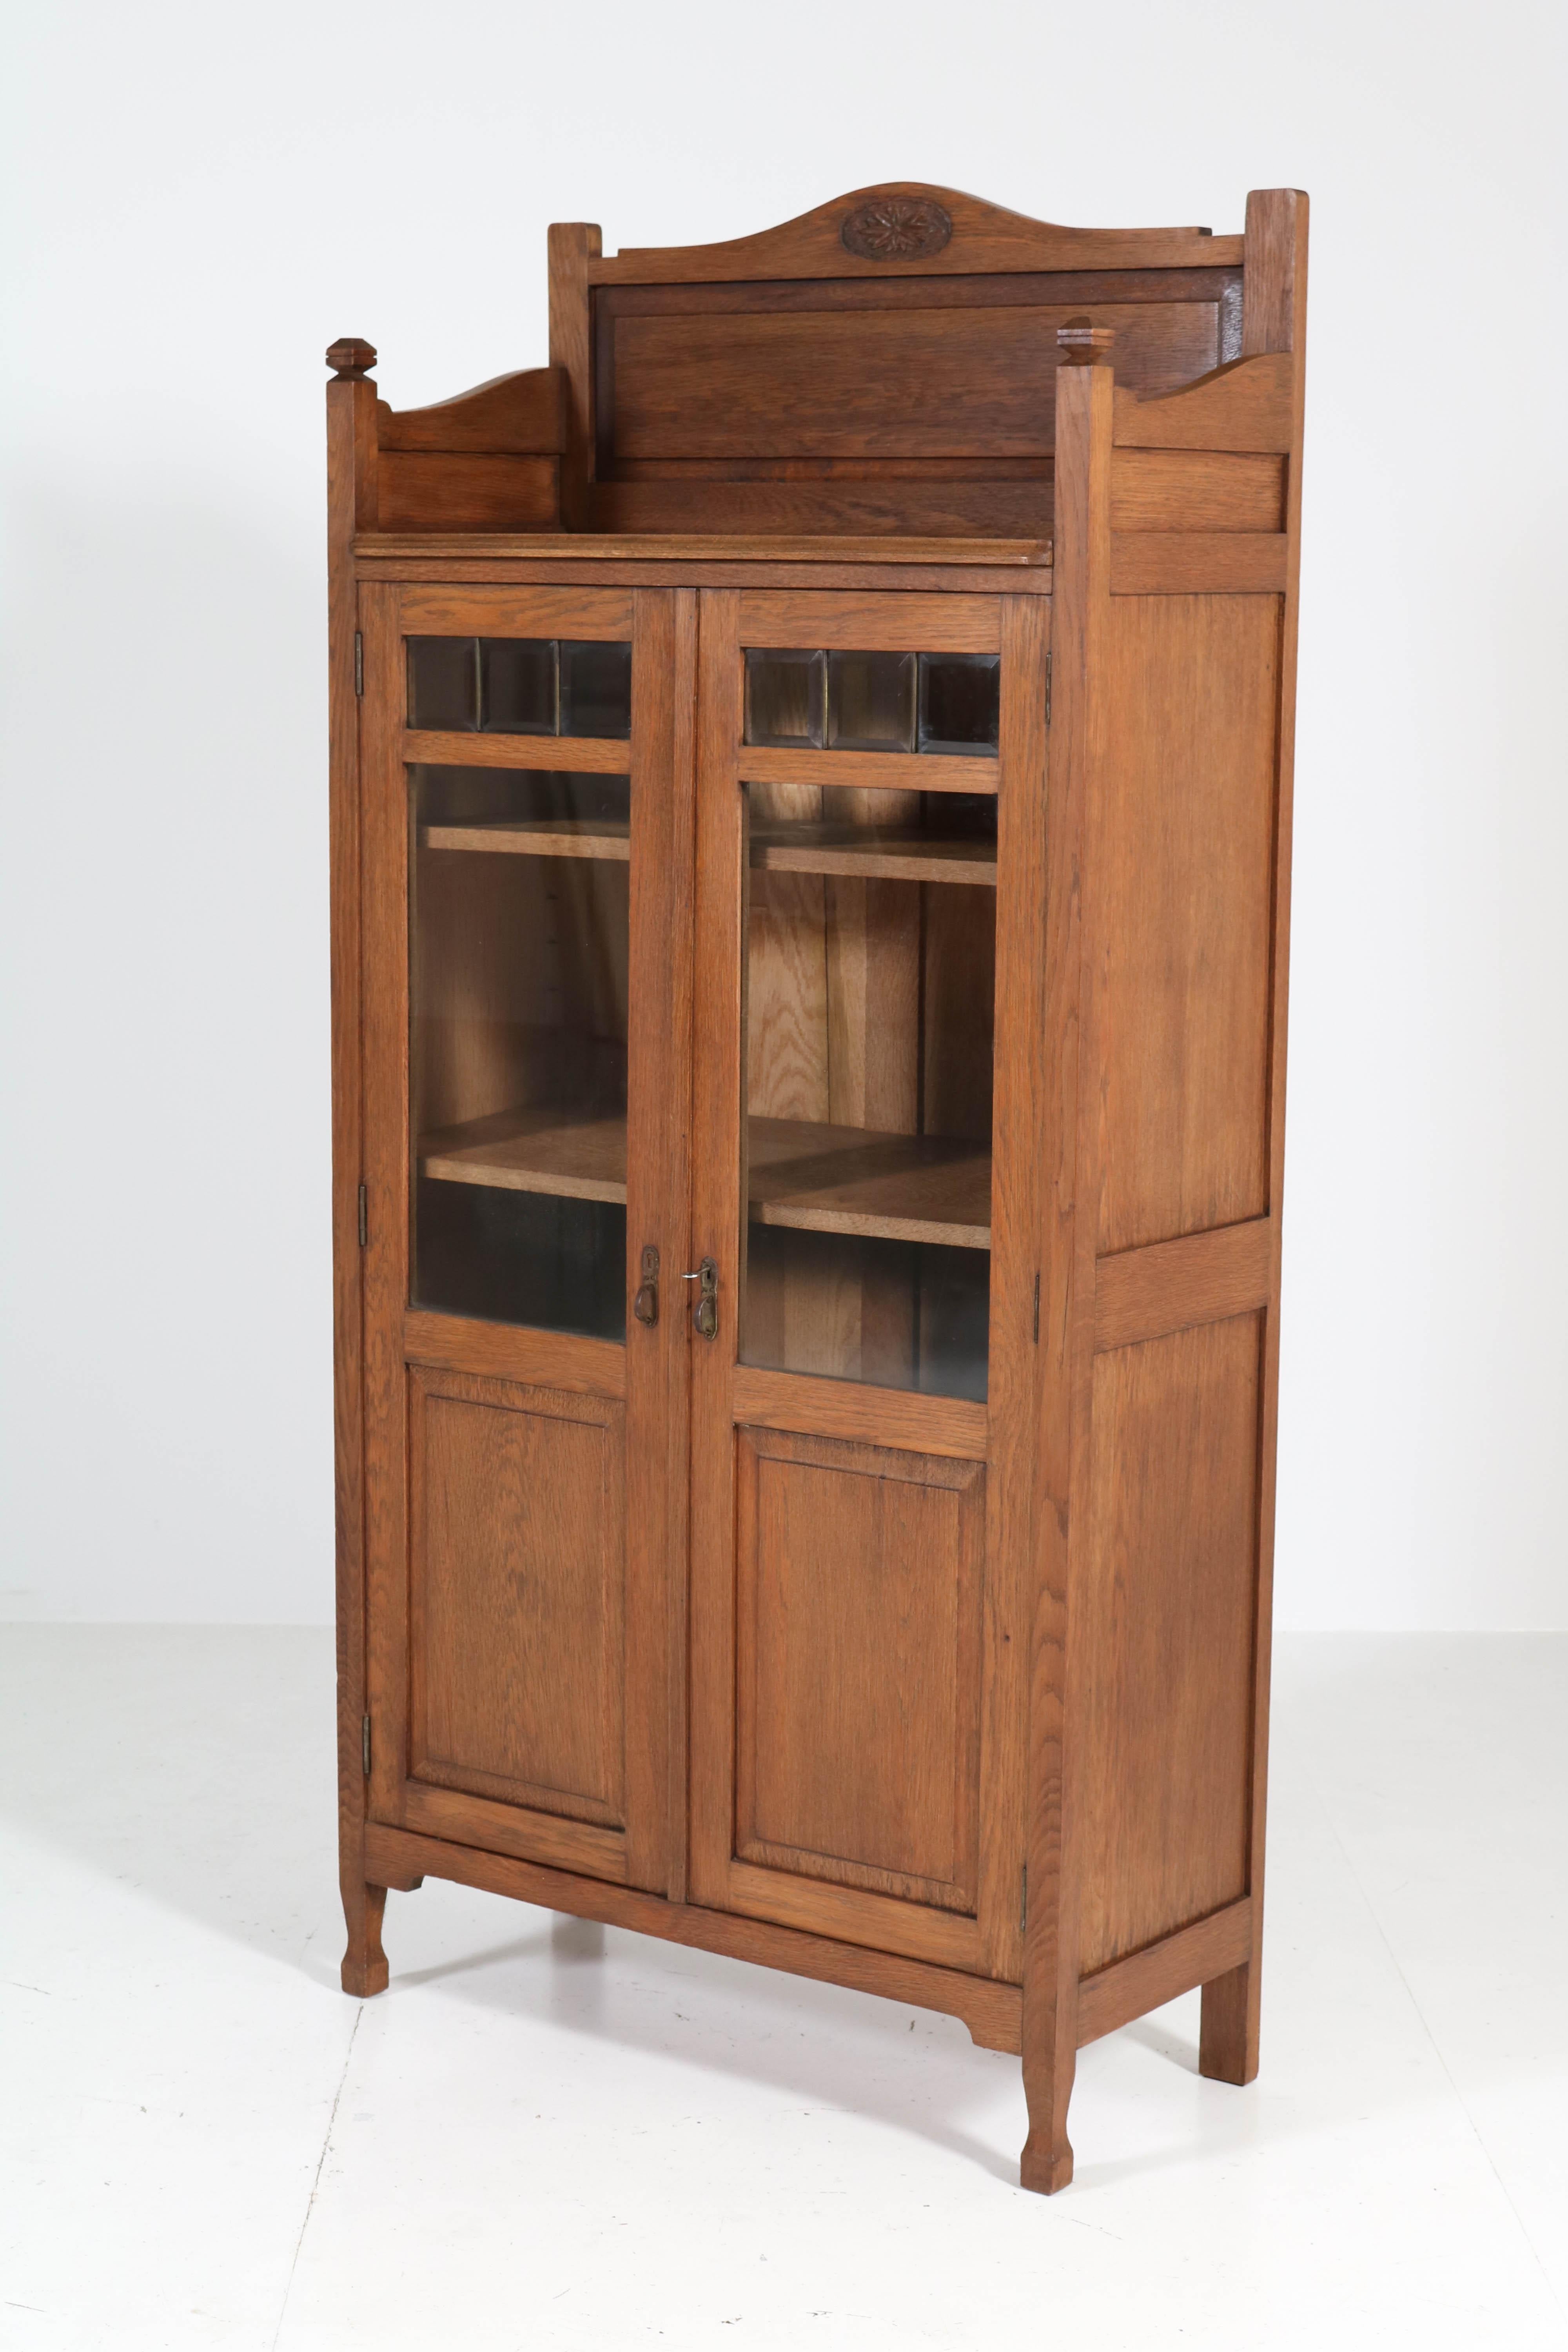 Wonderful Art Nouveau Arts & Crafts bookcase.
Striking Dutch design from the 1900s.
Solid oak with original brass handles.
Three original solid oak shelves.
This bookcase cannot be dismantled!
In good original condition with minor wear